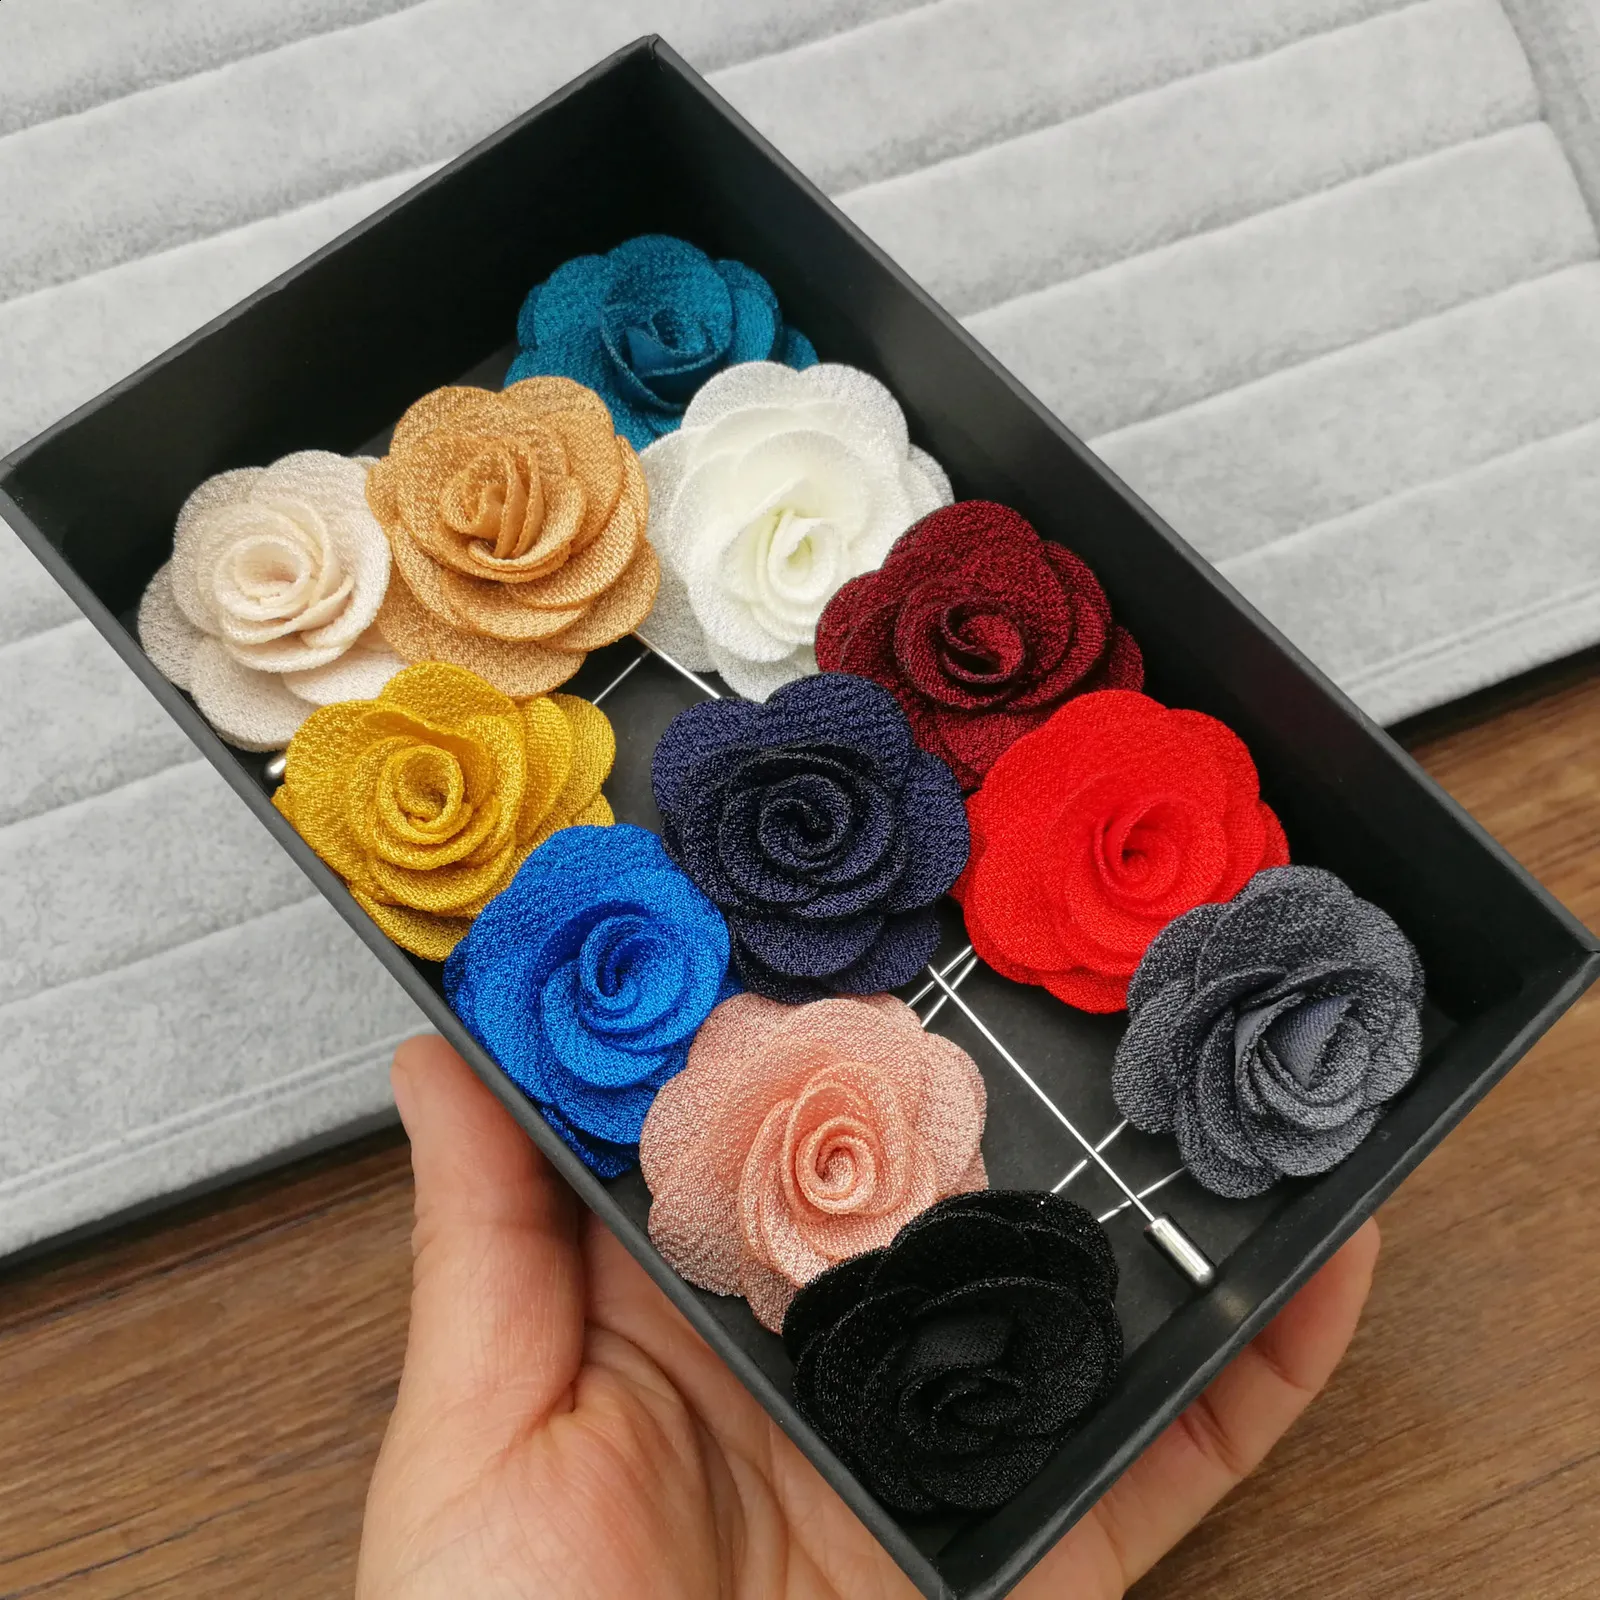 Fabric Flower Brooches for Women Brooch Pins Suits Decoration Lapel Pins For Men Brooch for Suits Accessories in GiftBox 240220